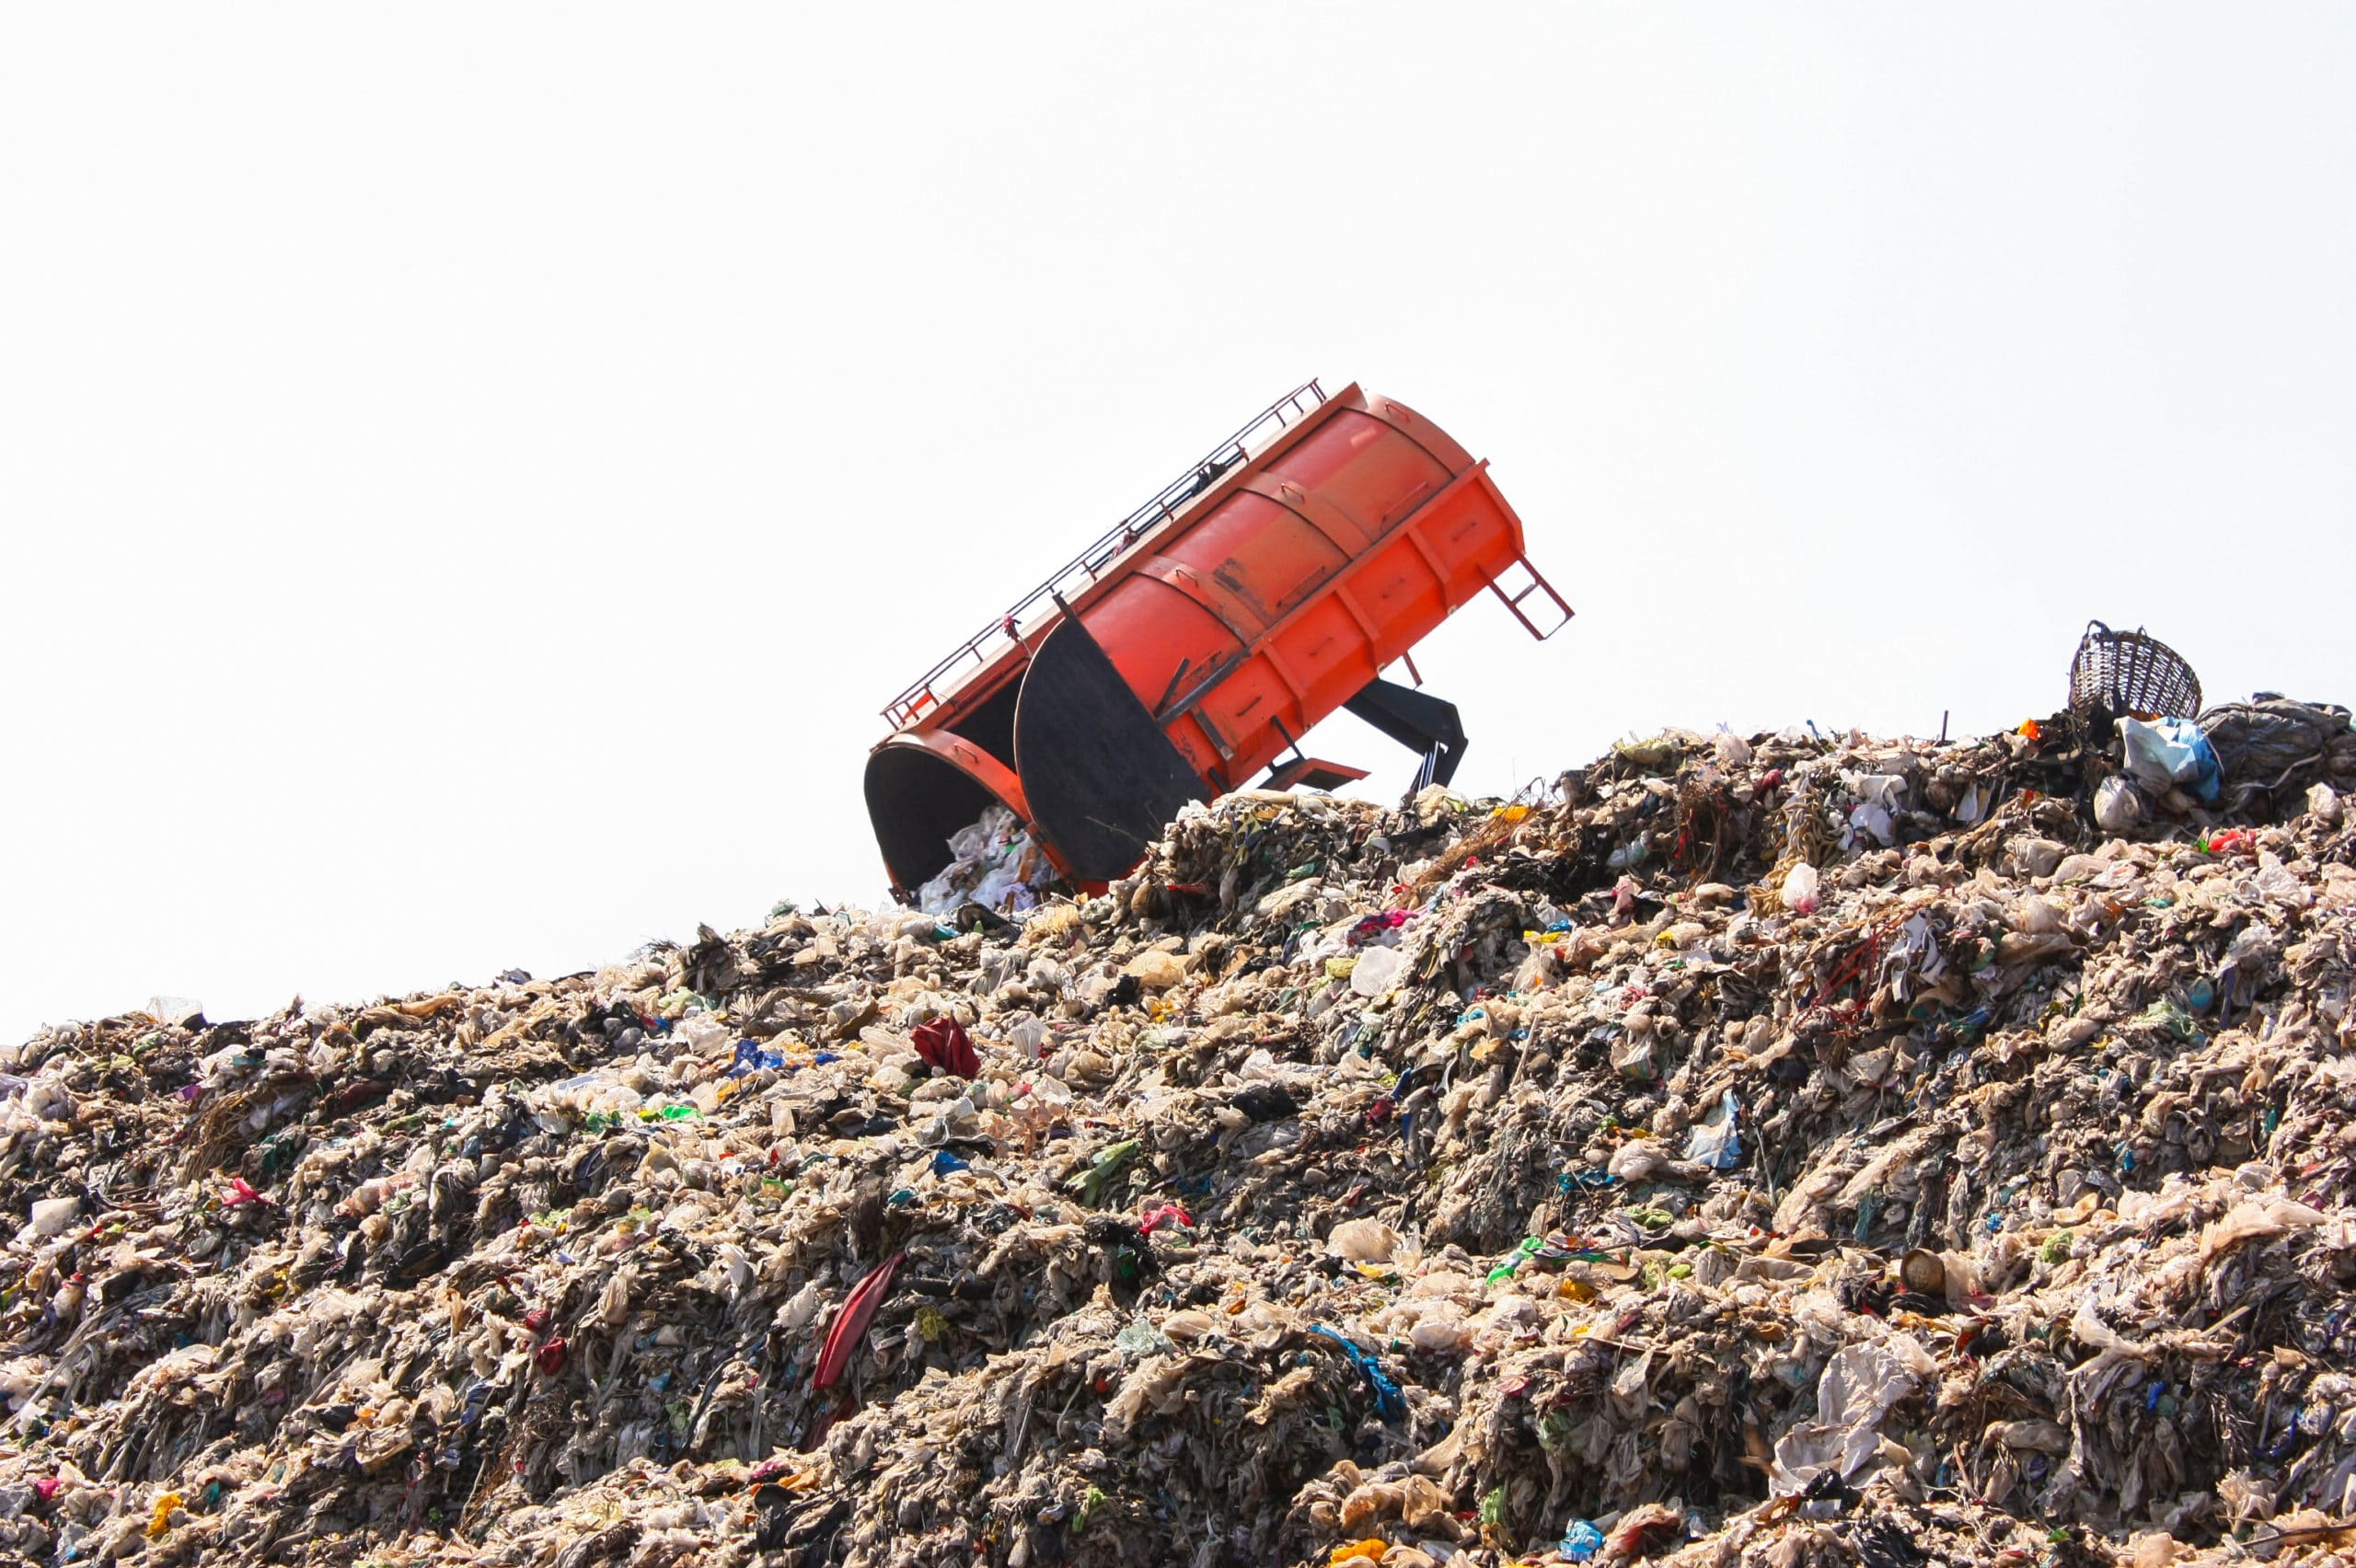 Landfill of Packaging Waste - 3 Trends in Supply Chain Sustainability